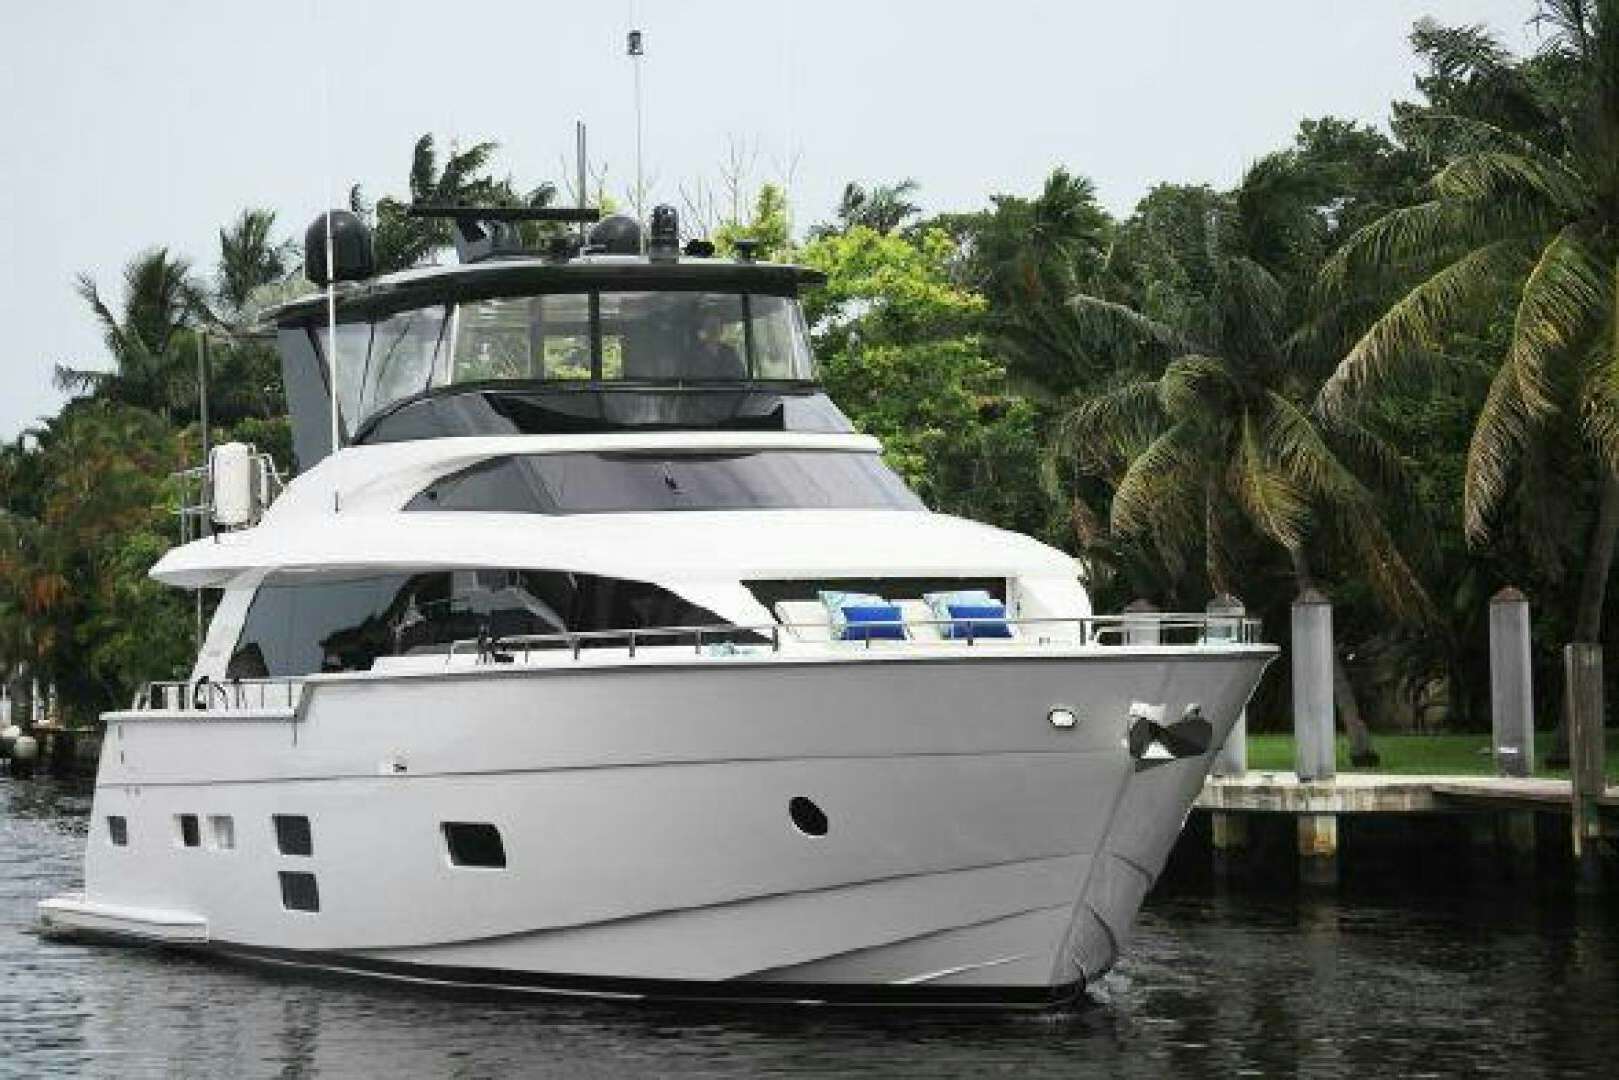 M75
Yacht for Sale